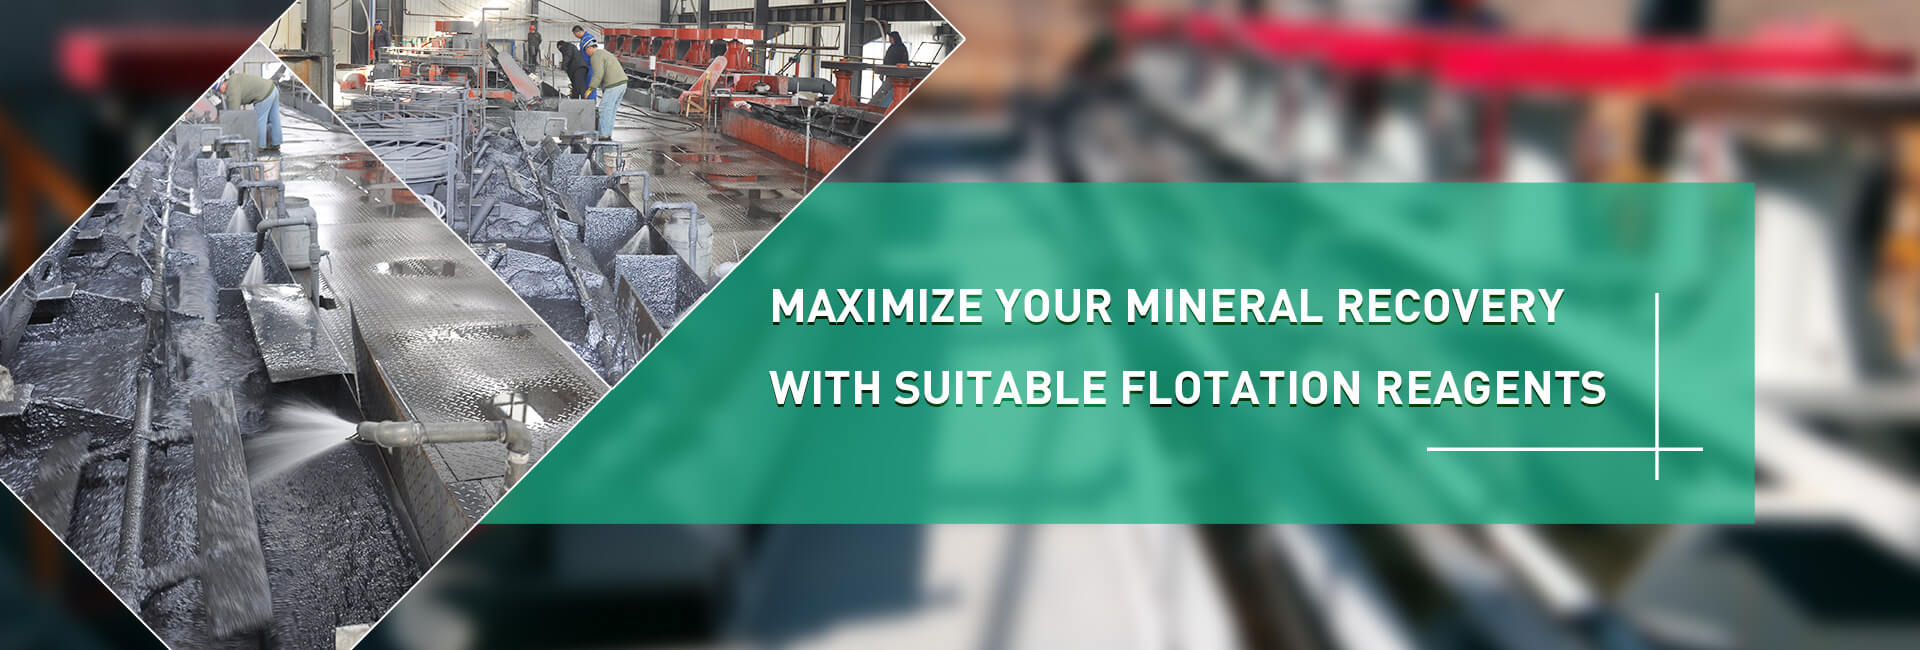 Maximize your mineral recovery with Suitable flotation reagents